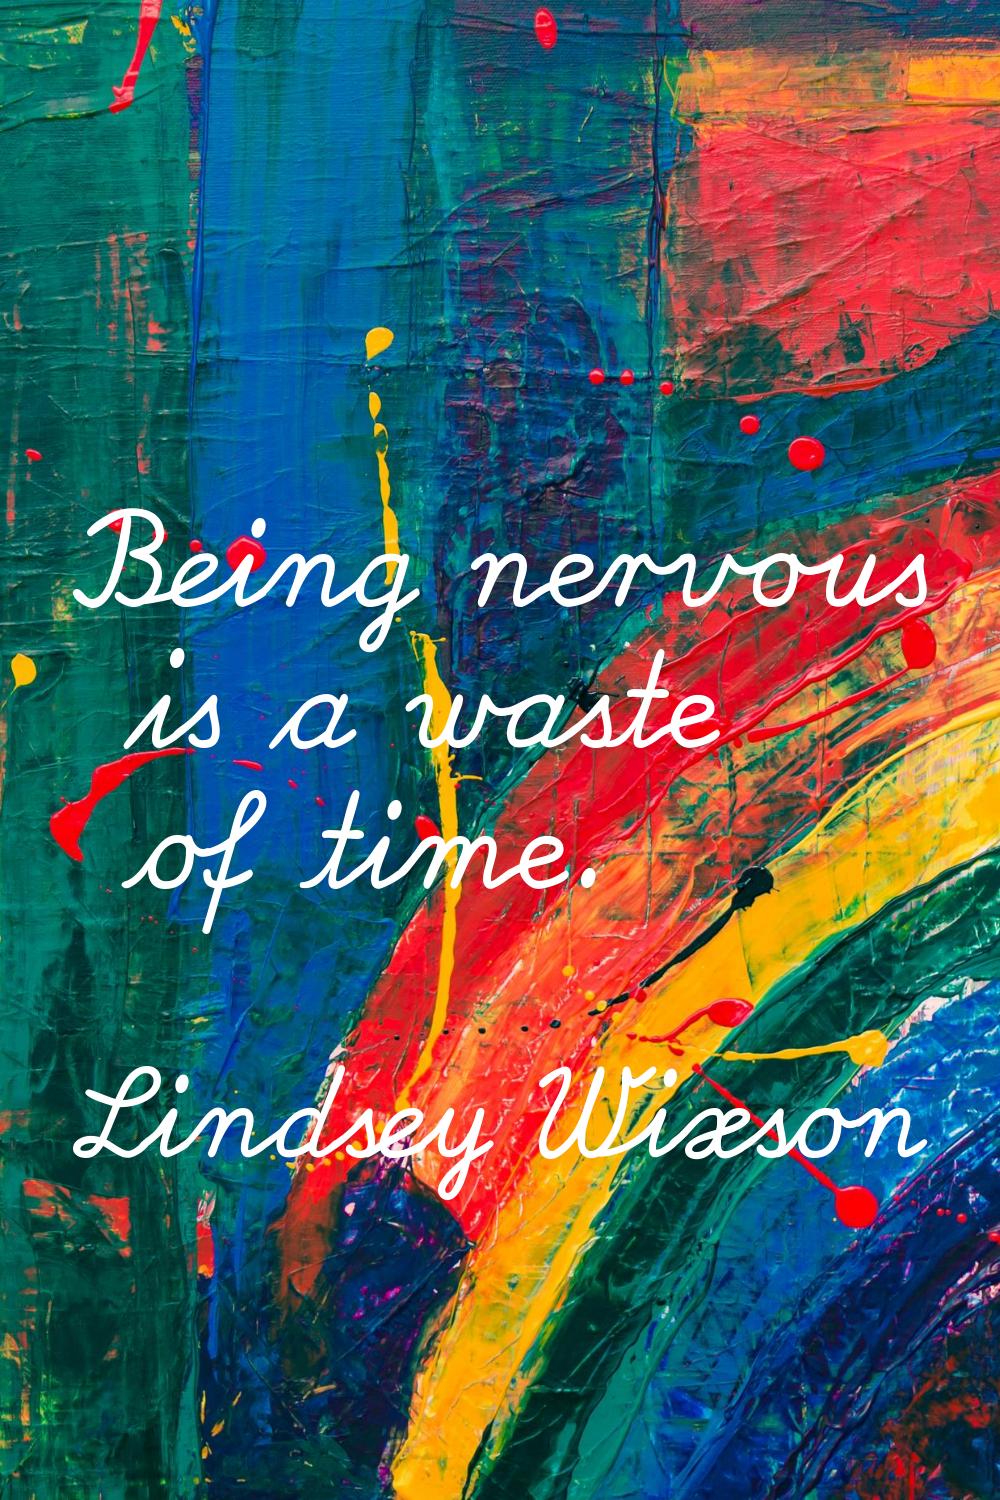 Being nervous is a waste of time.